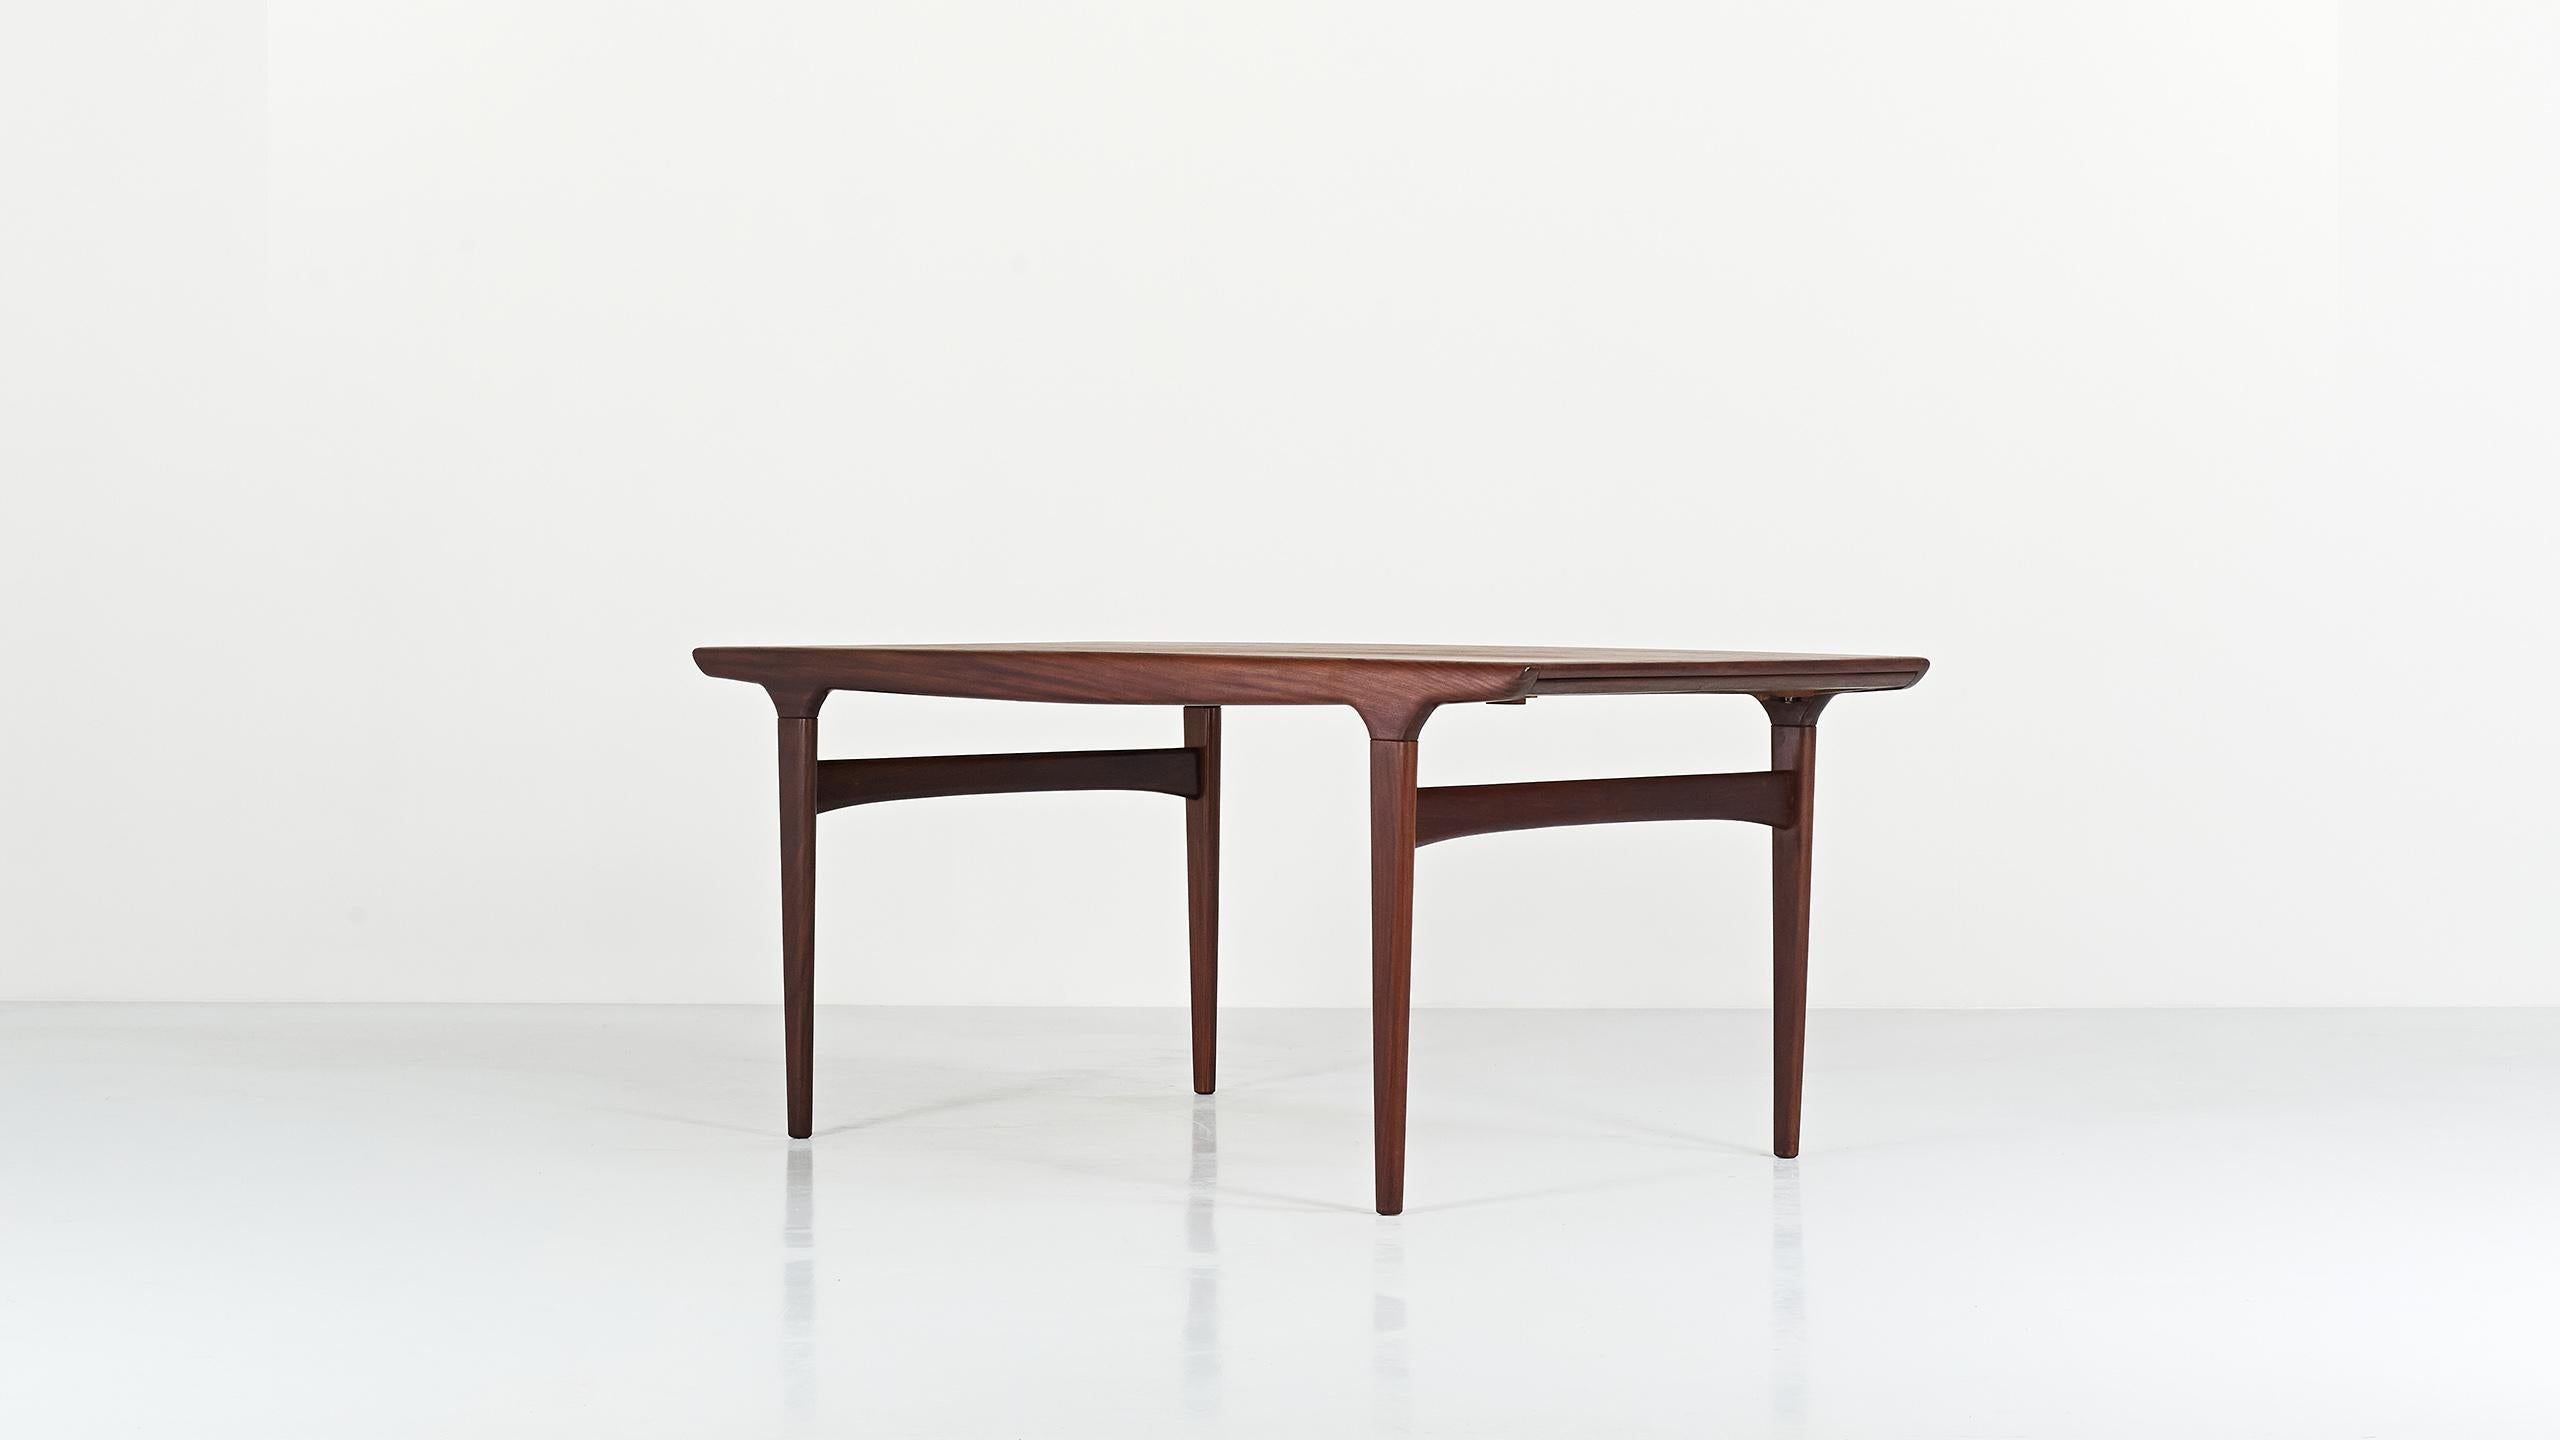 Teak dining table, by designer Johannes Andersen for Uldum Møbelfabrik. Structure in teak and teak veneer. One extension, placed in a compartment under the top, allows the maximum length to be increased to 240cm. Small traces of use, excellent